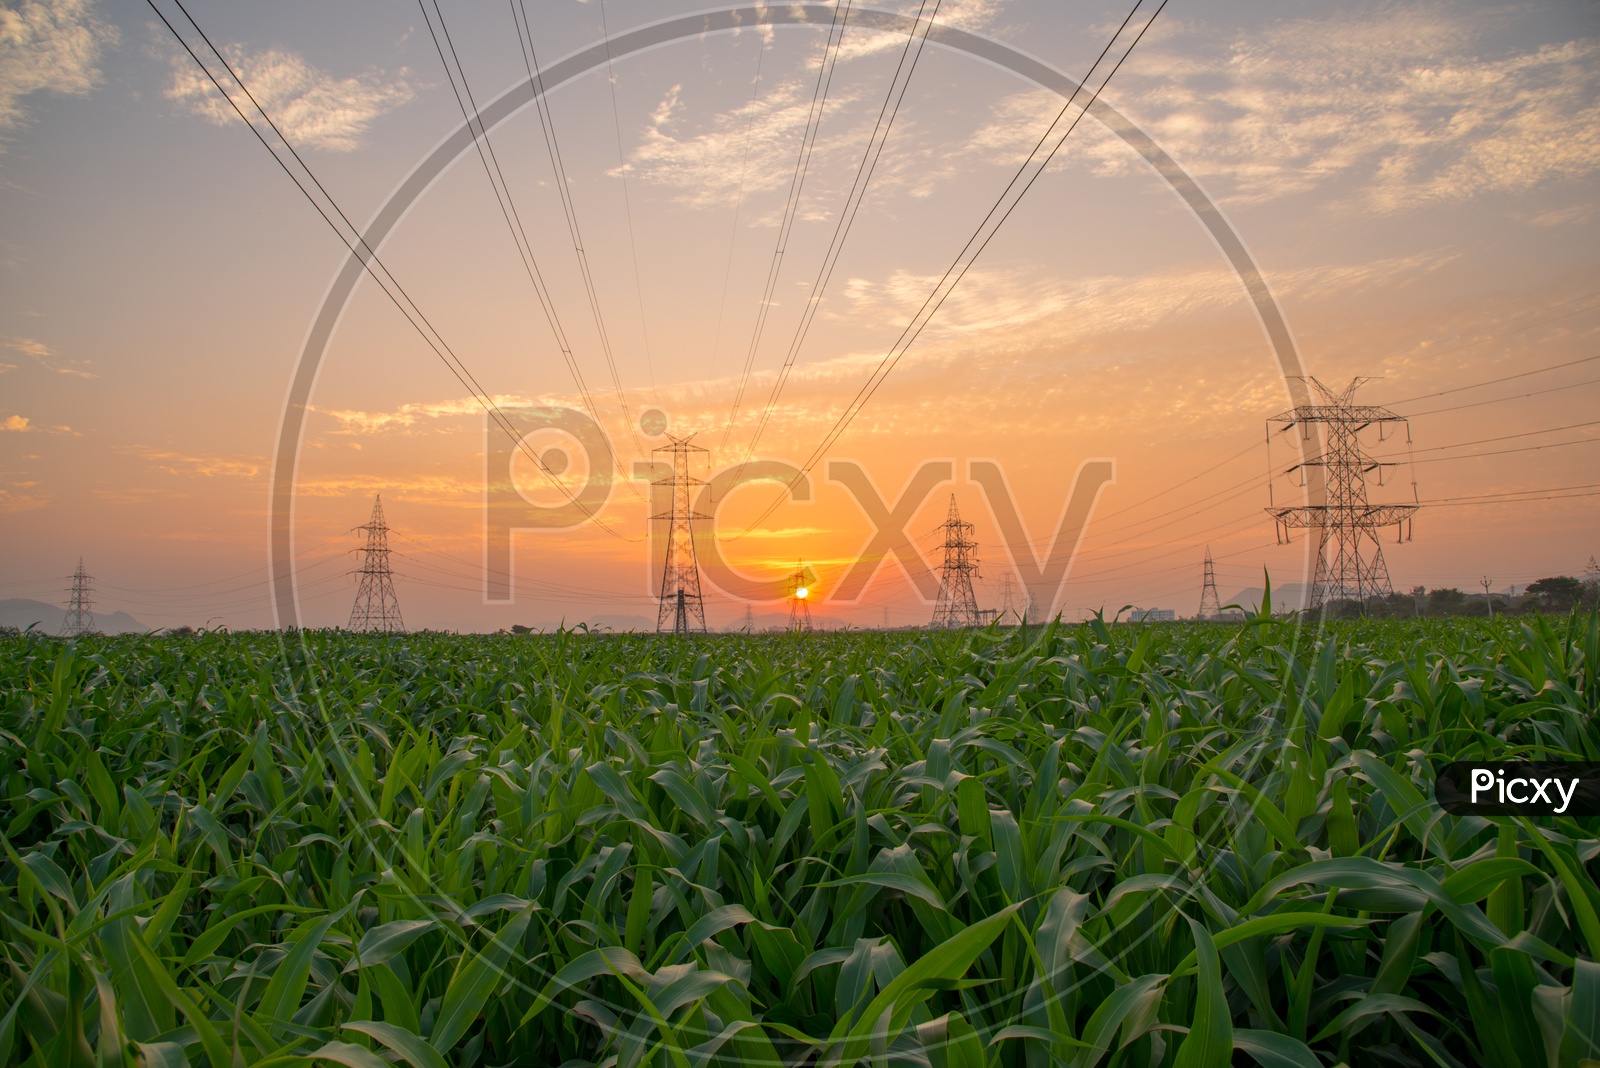 Millet fields and Electrical poles